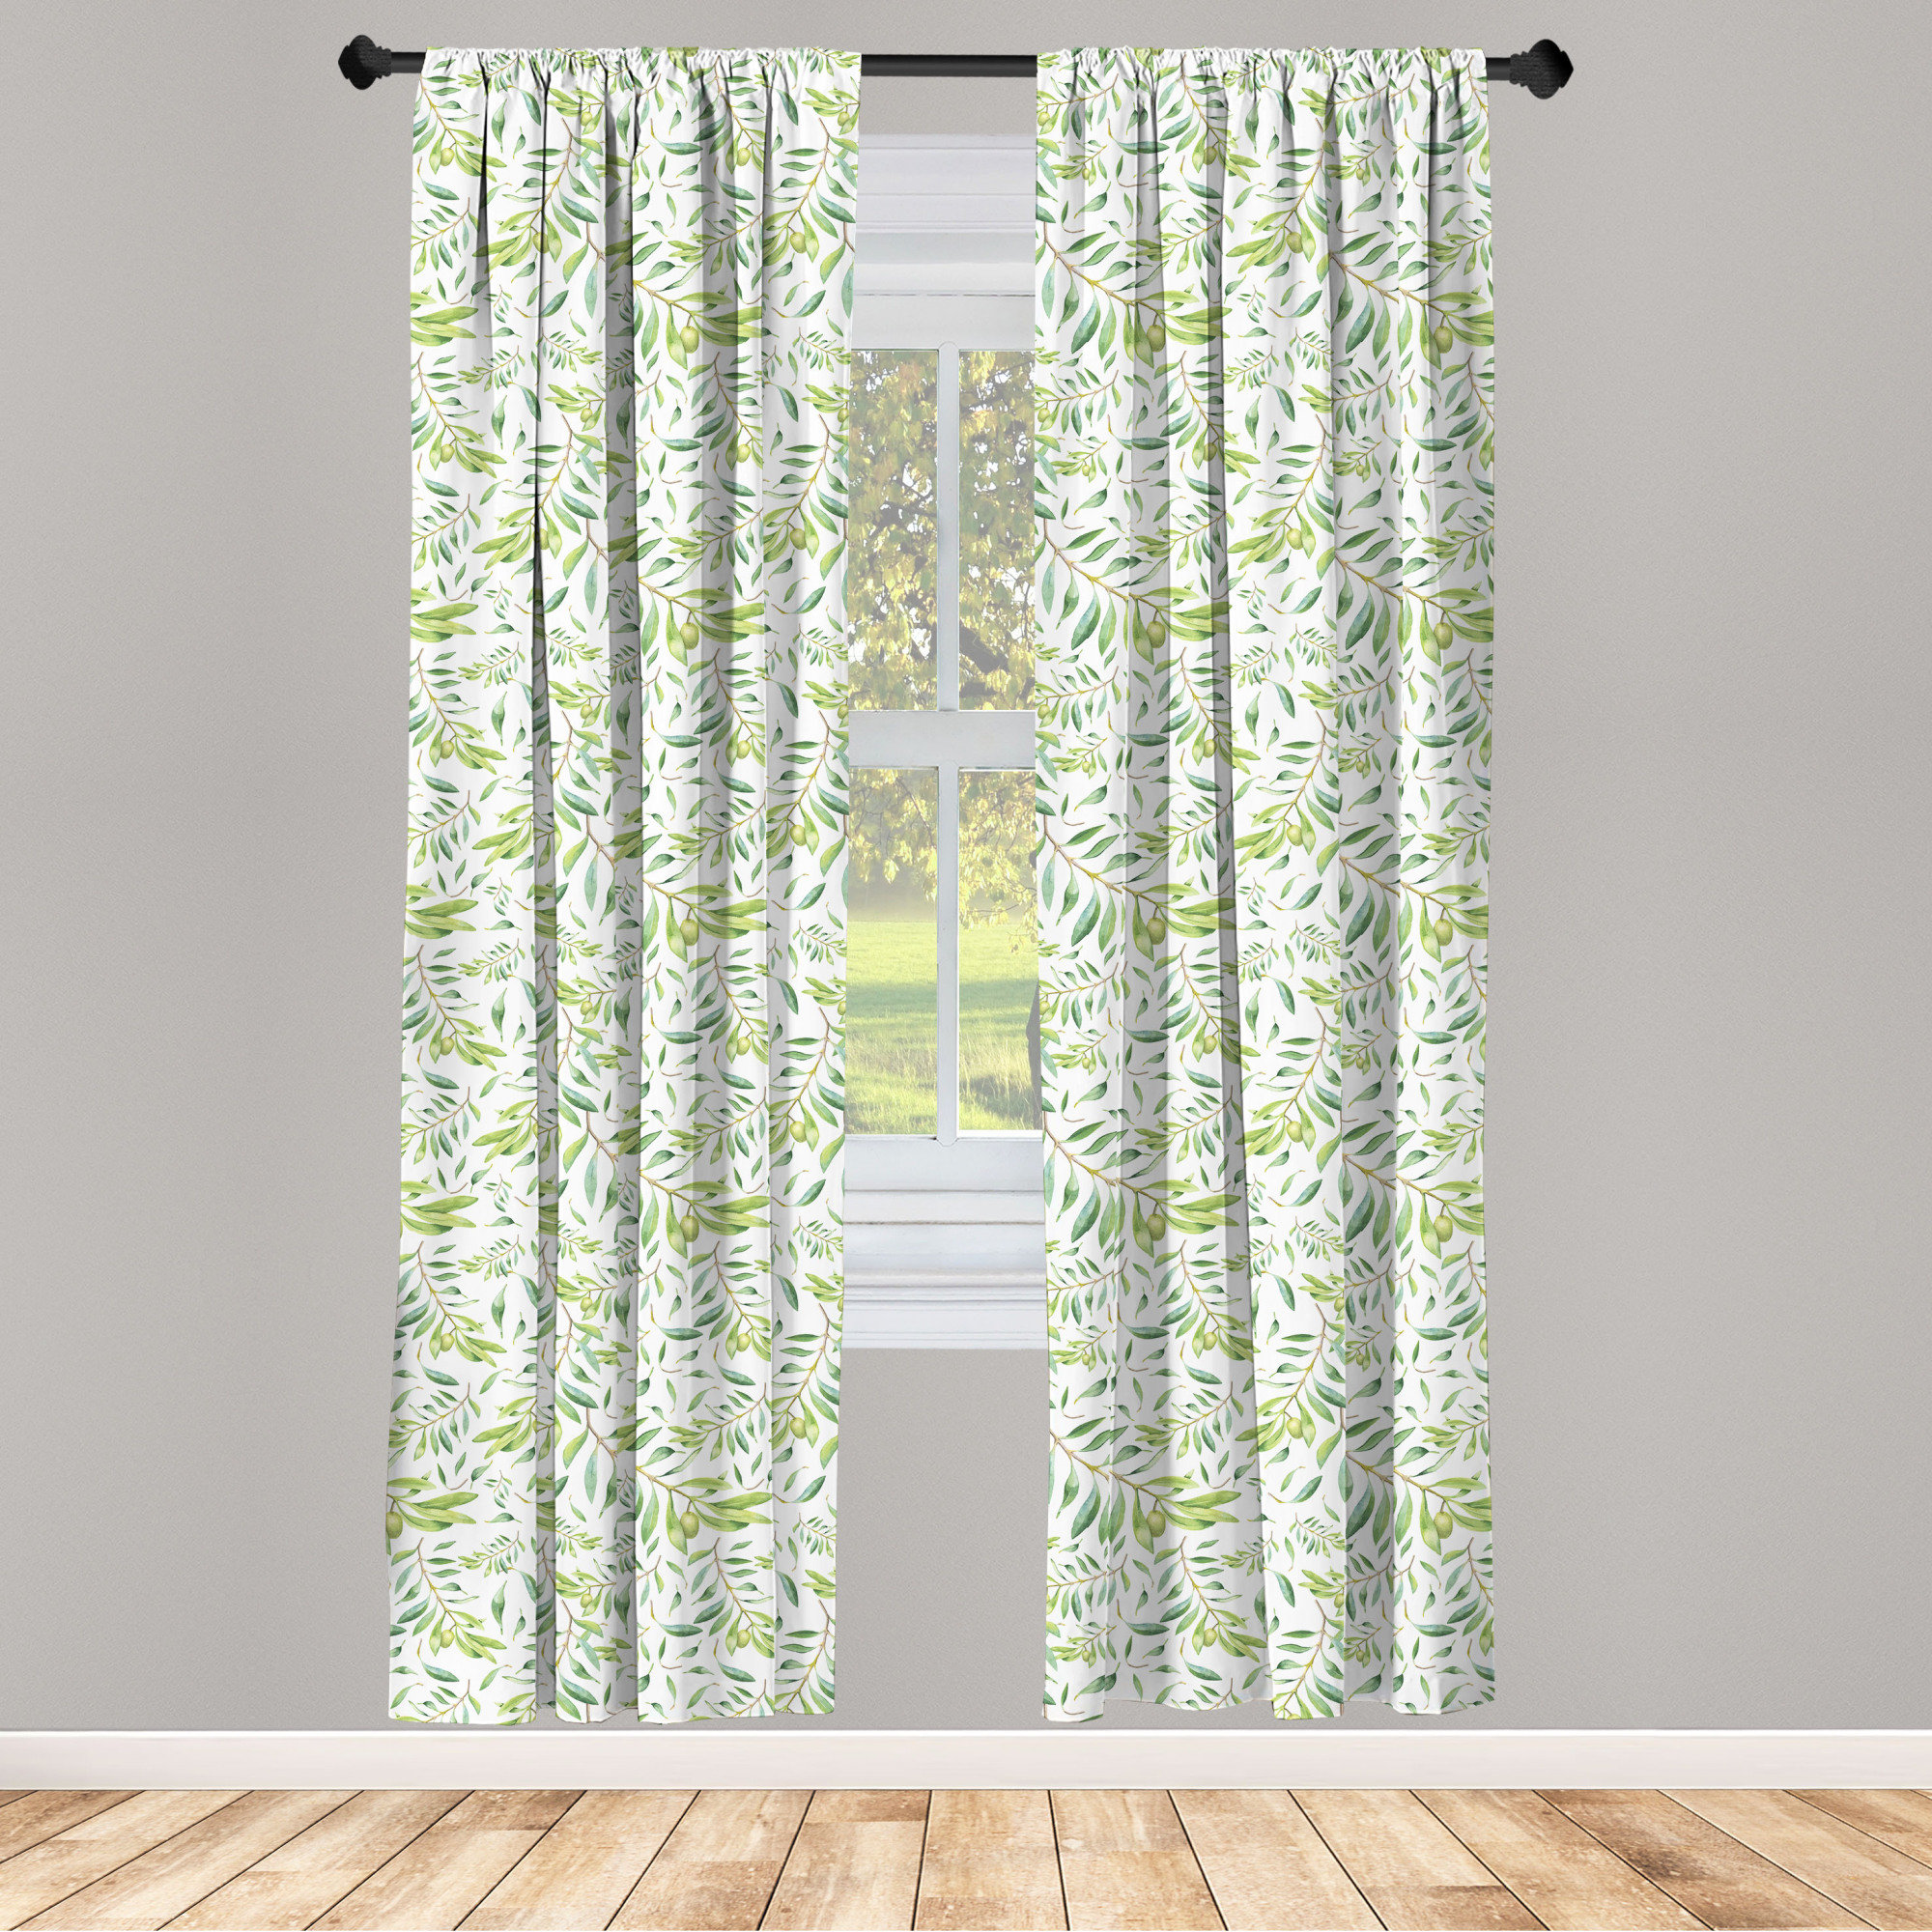 White Microfiber Curtains 2 Panel Set Living Room Bedroom in 3 Sizes 